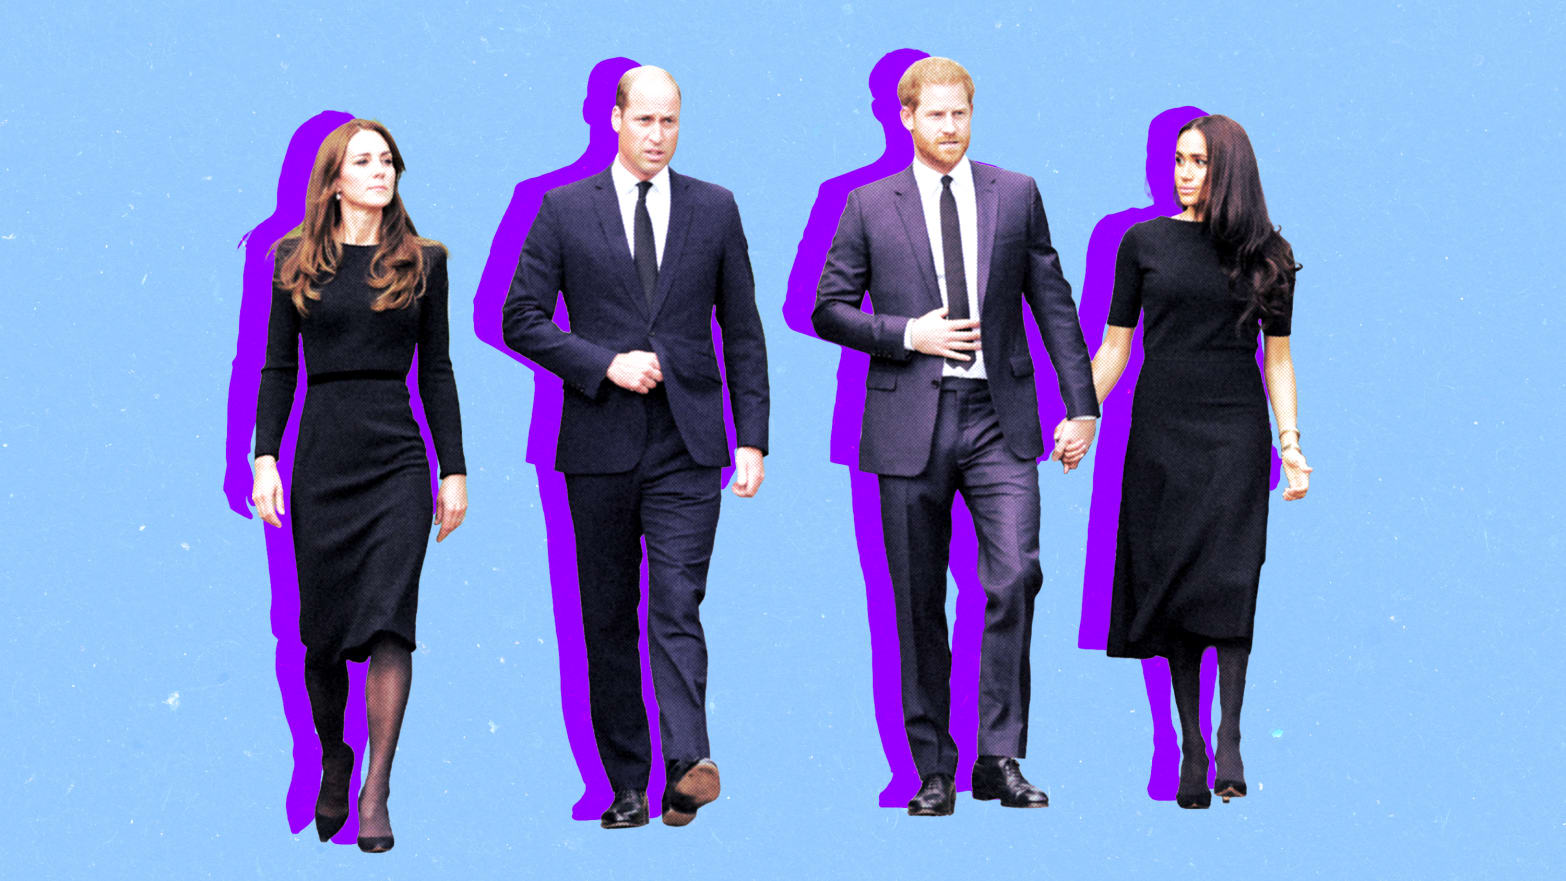 A photo illustration of Catherine, Princess of Wales, Prince William, Prince of Wales, Prince Harry, Duke of Sussex, and Meghan, Duchess of Sussex .